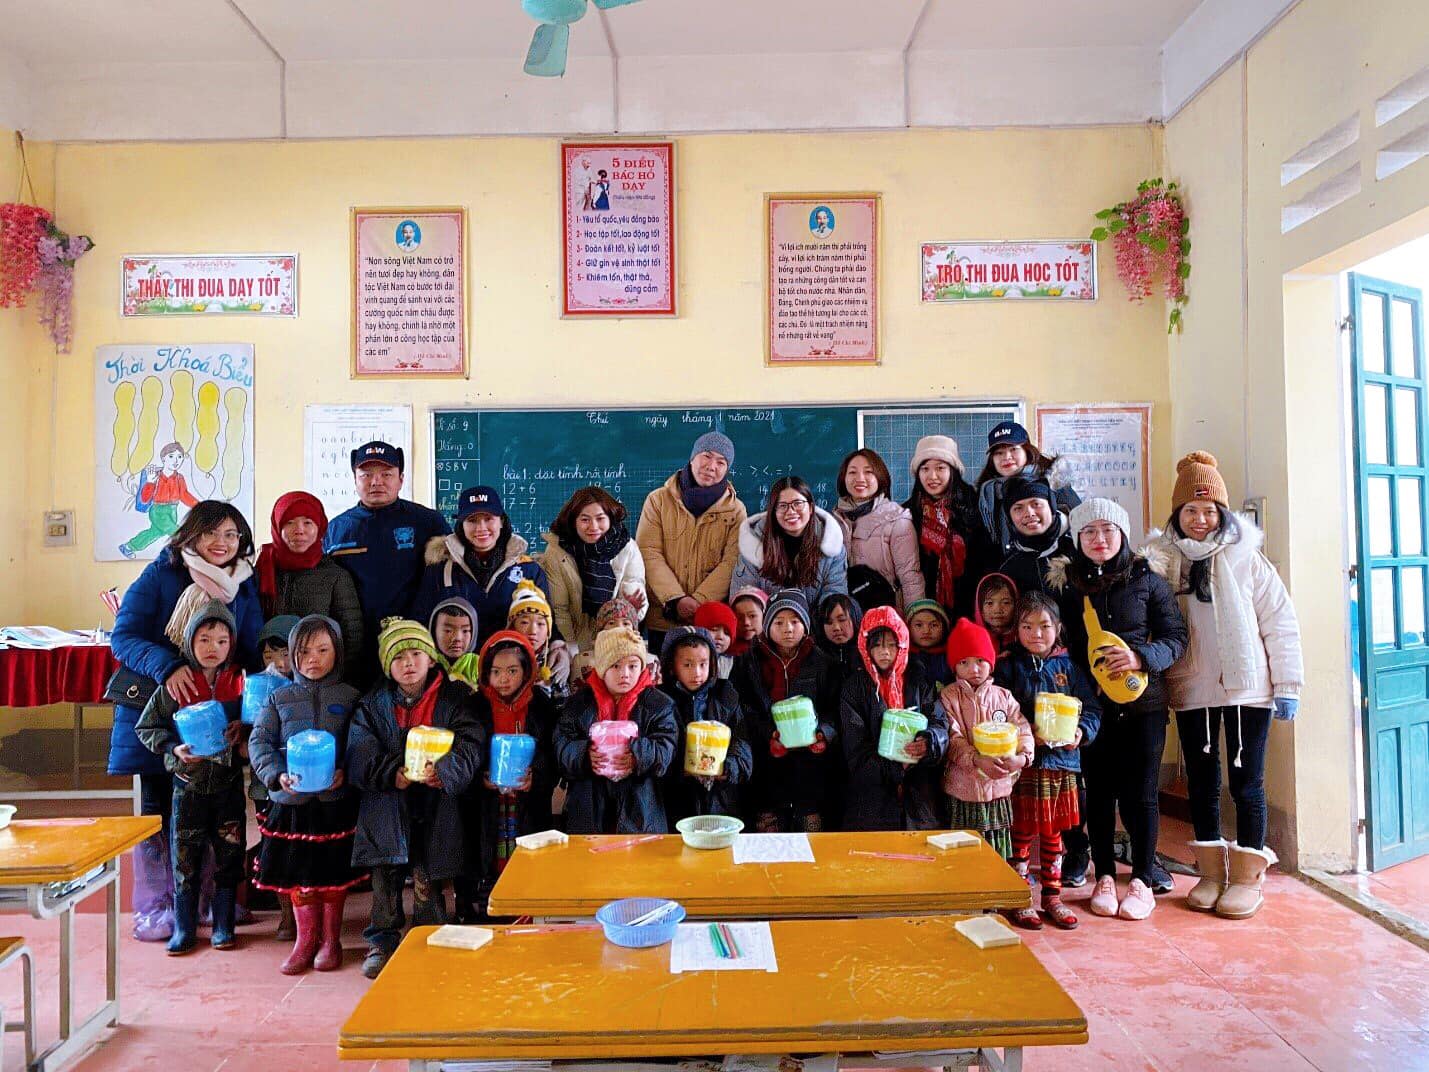 A CHARITABLE TRIP TO Y TY, HA GIANG